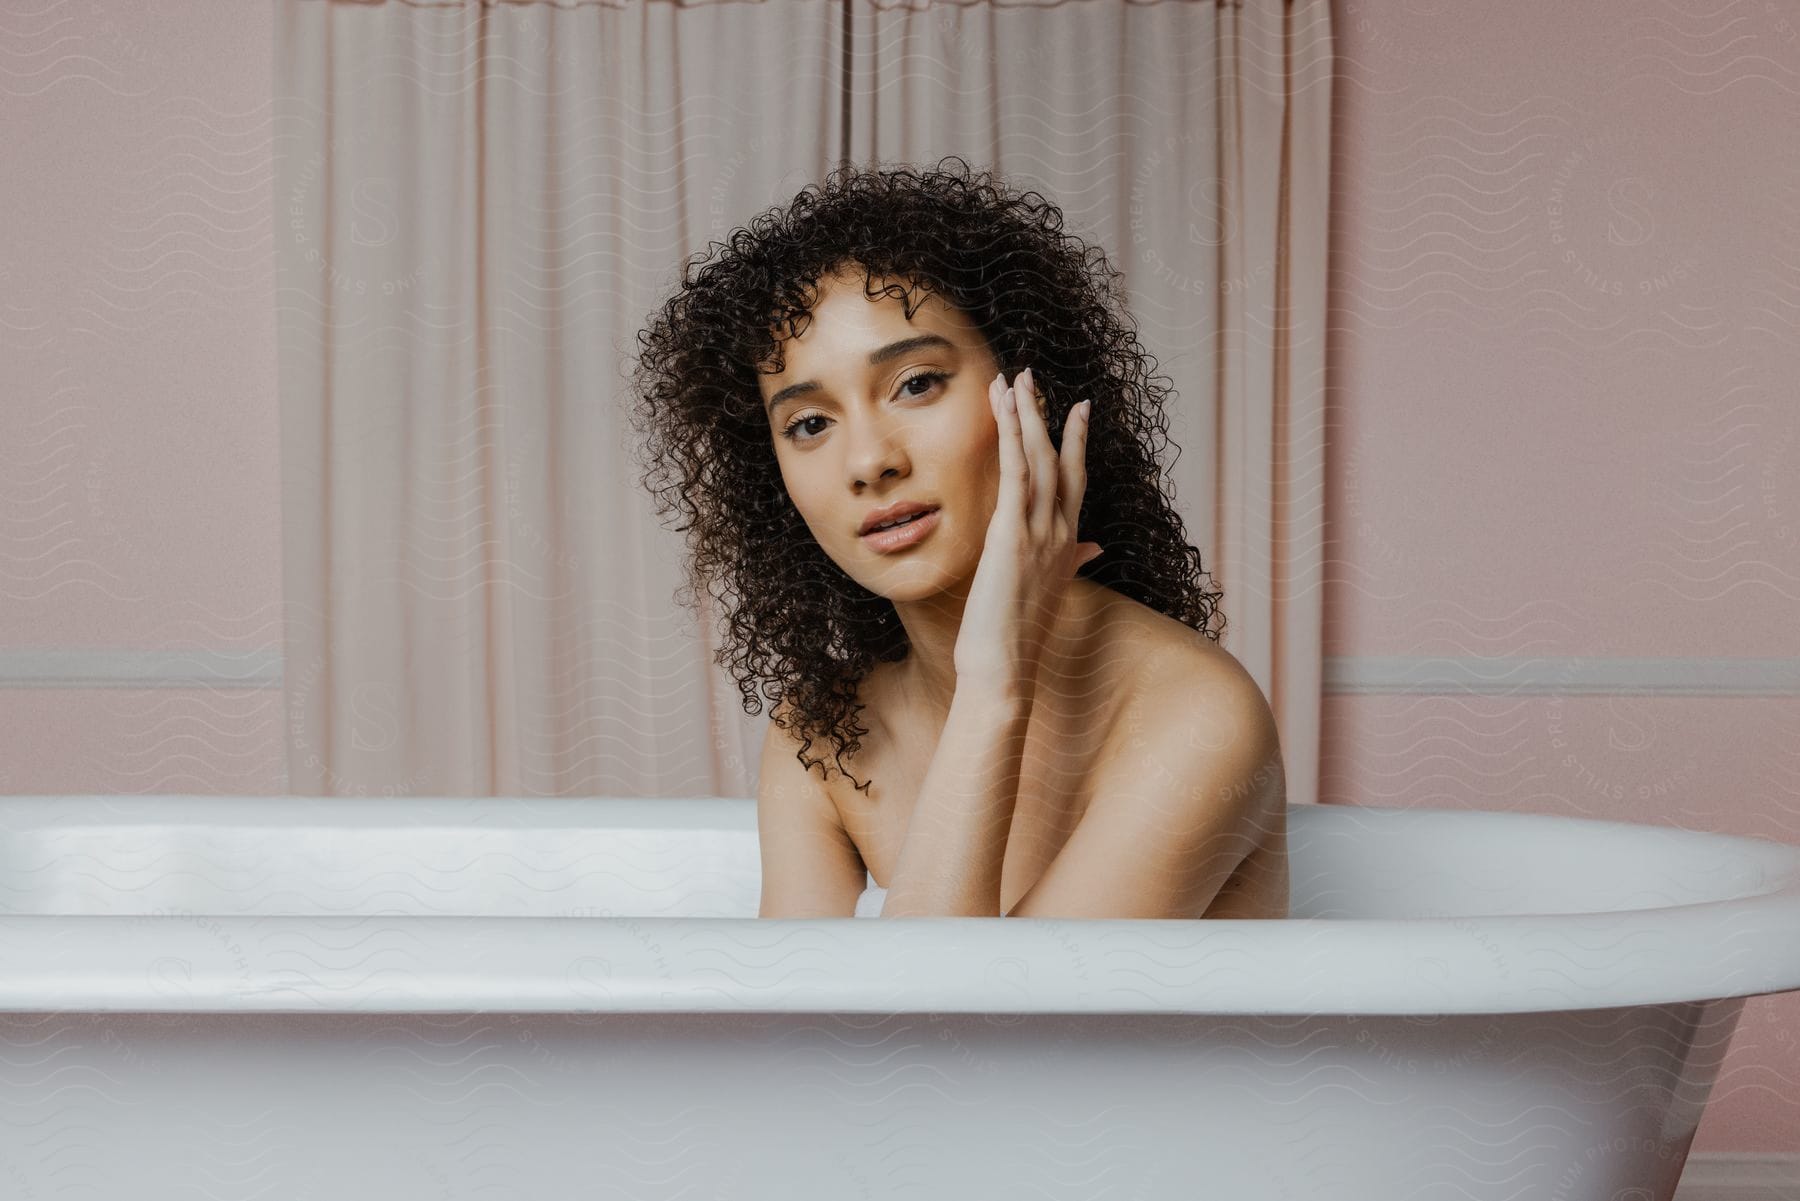 A woman is sitting in a bathtub holding her face using her hand and is looking straight ahead